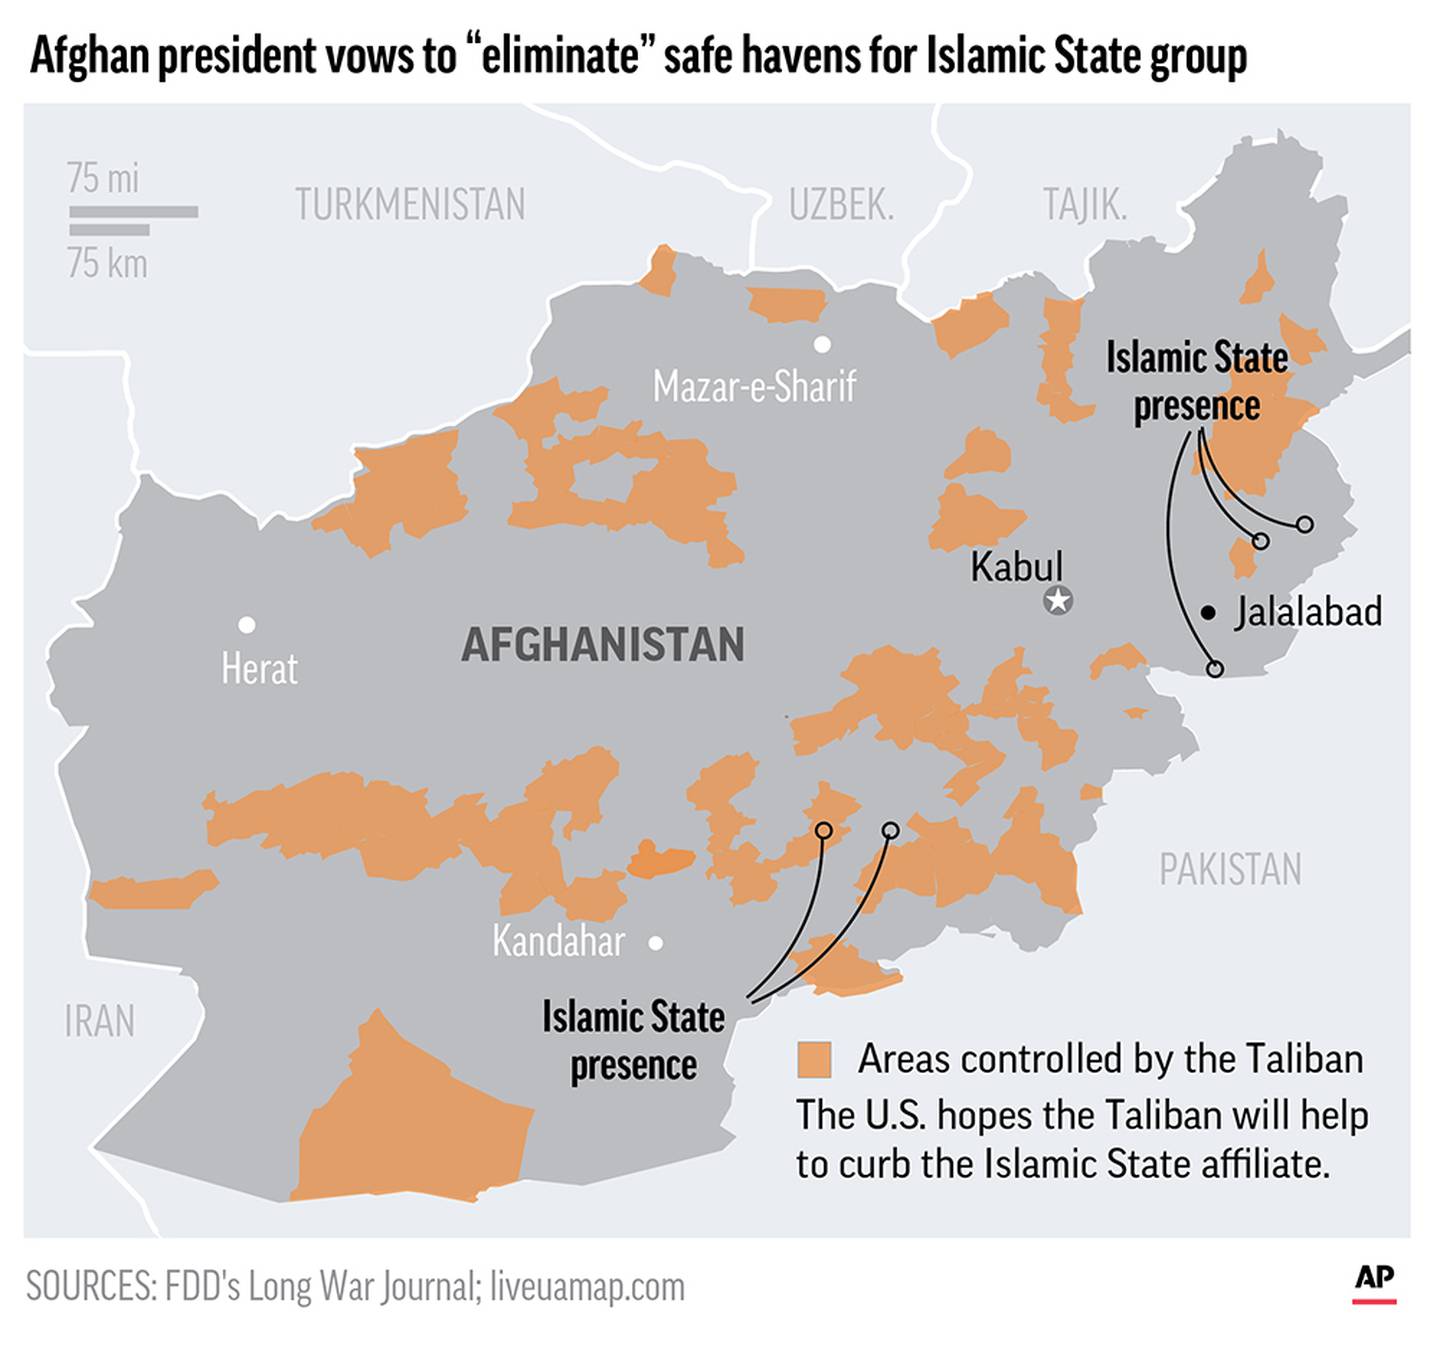 The U.S. hopes the Taliban will help it curb the Islamic state group.;